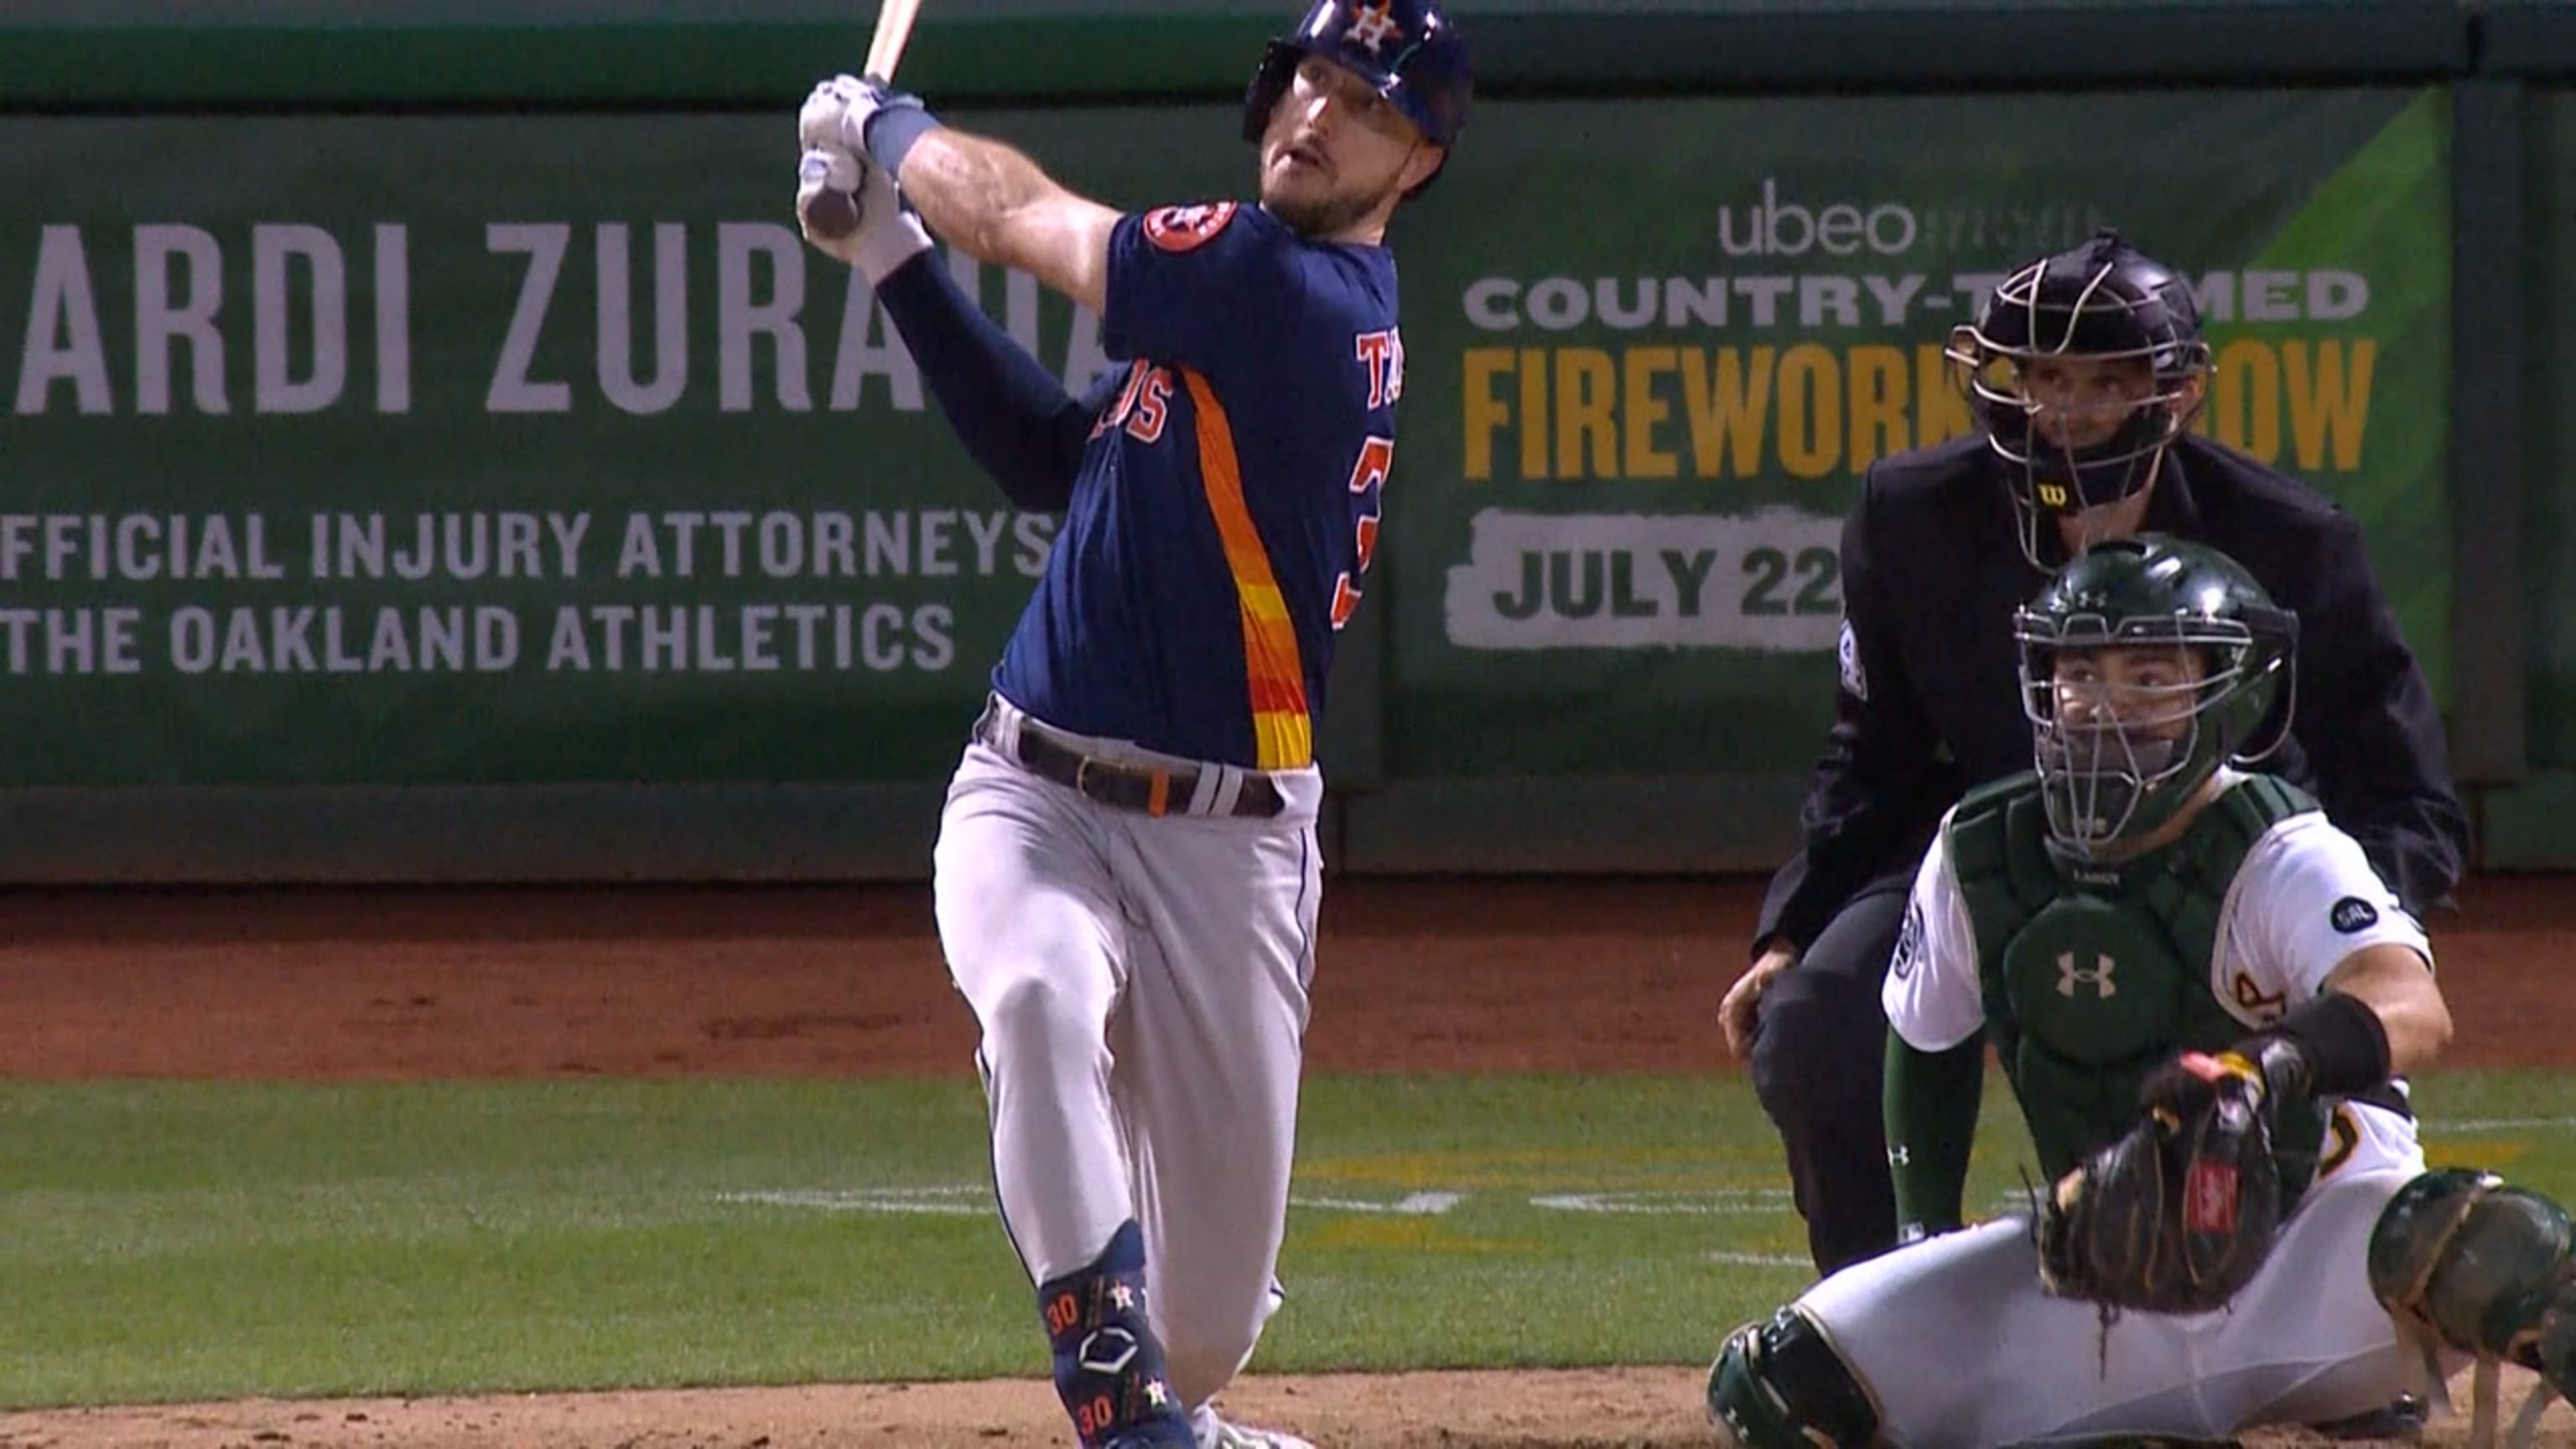 Kyle Tucker hits 3 HRs and drives in 4 runs as the Astros beat the  Athletics 6-4 